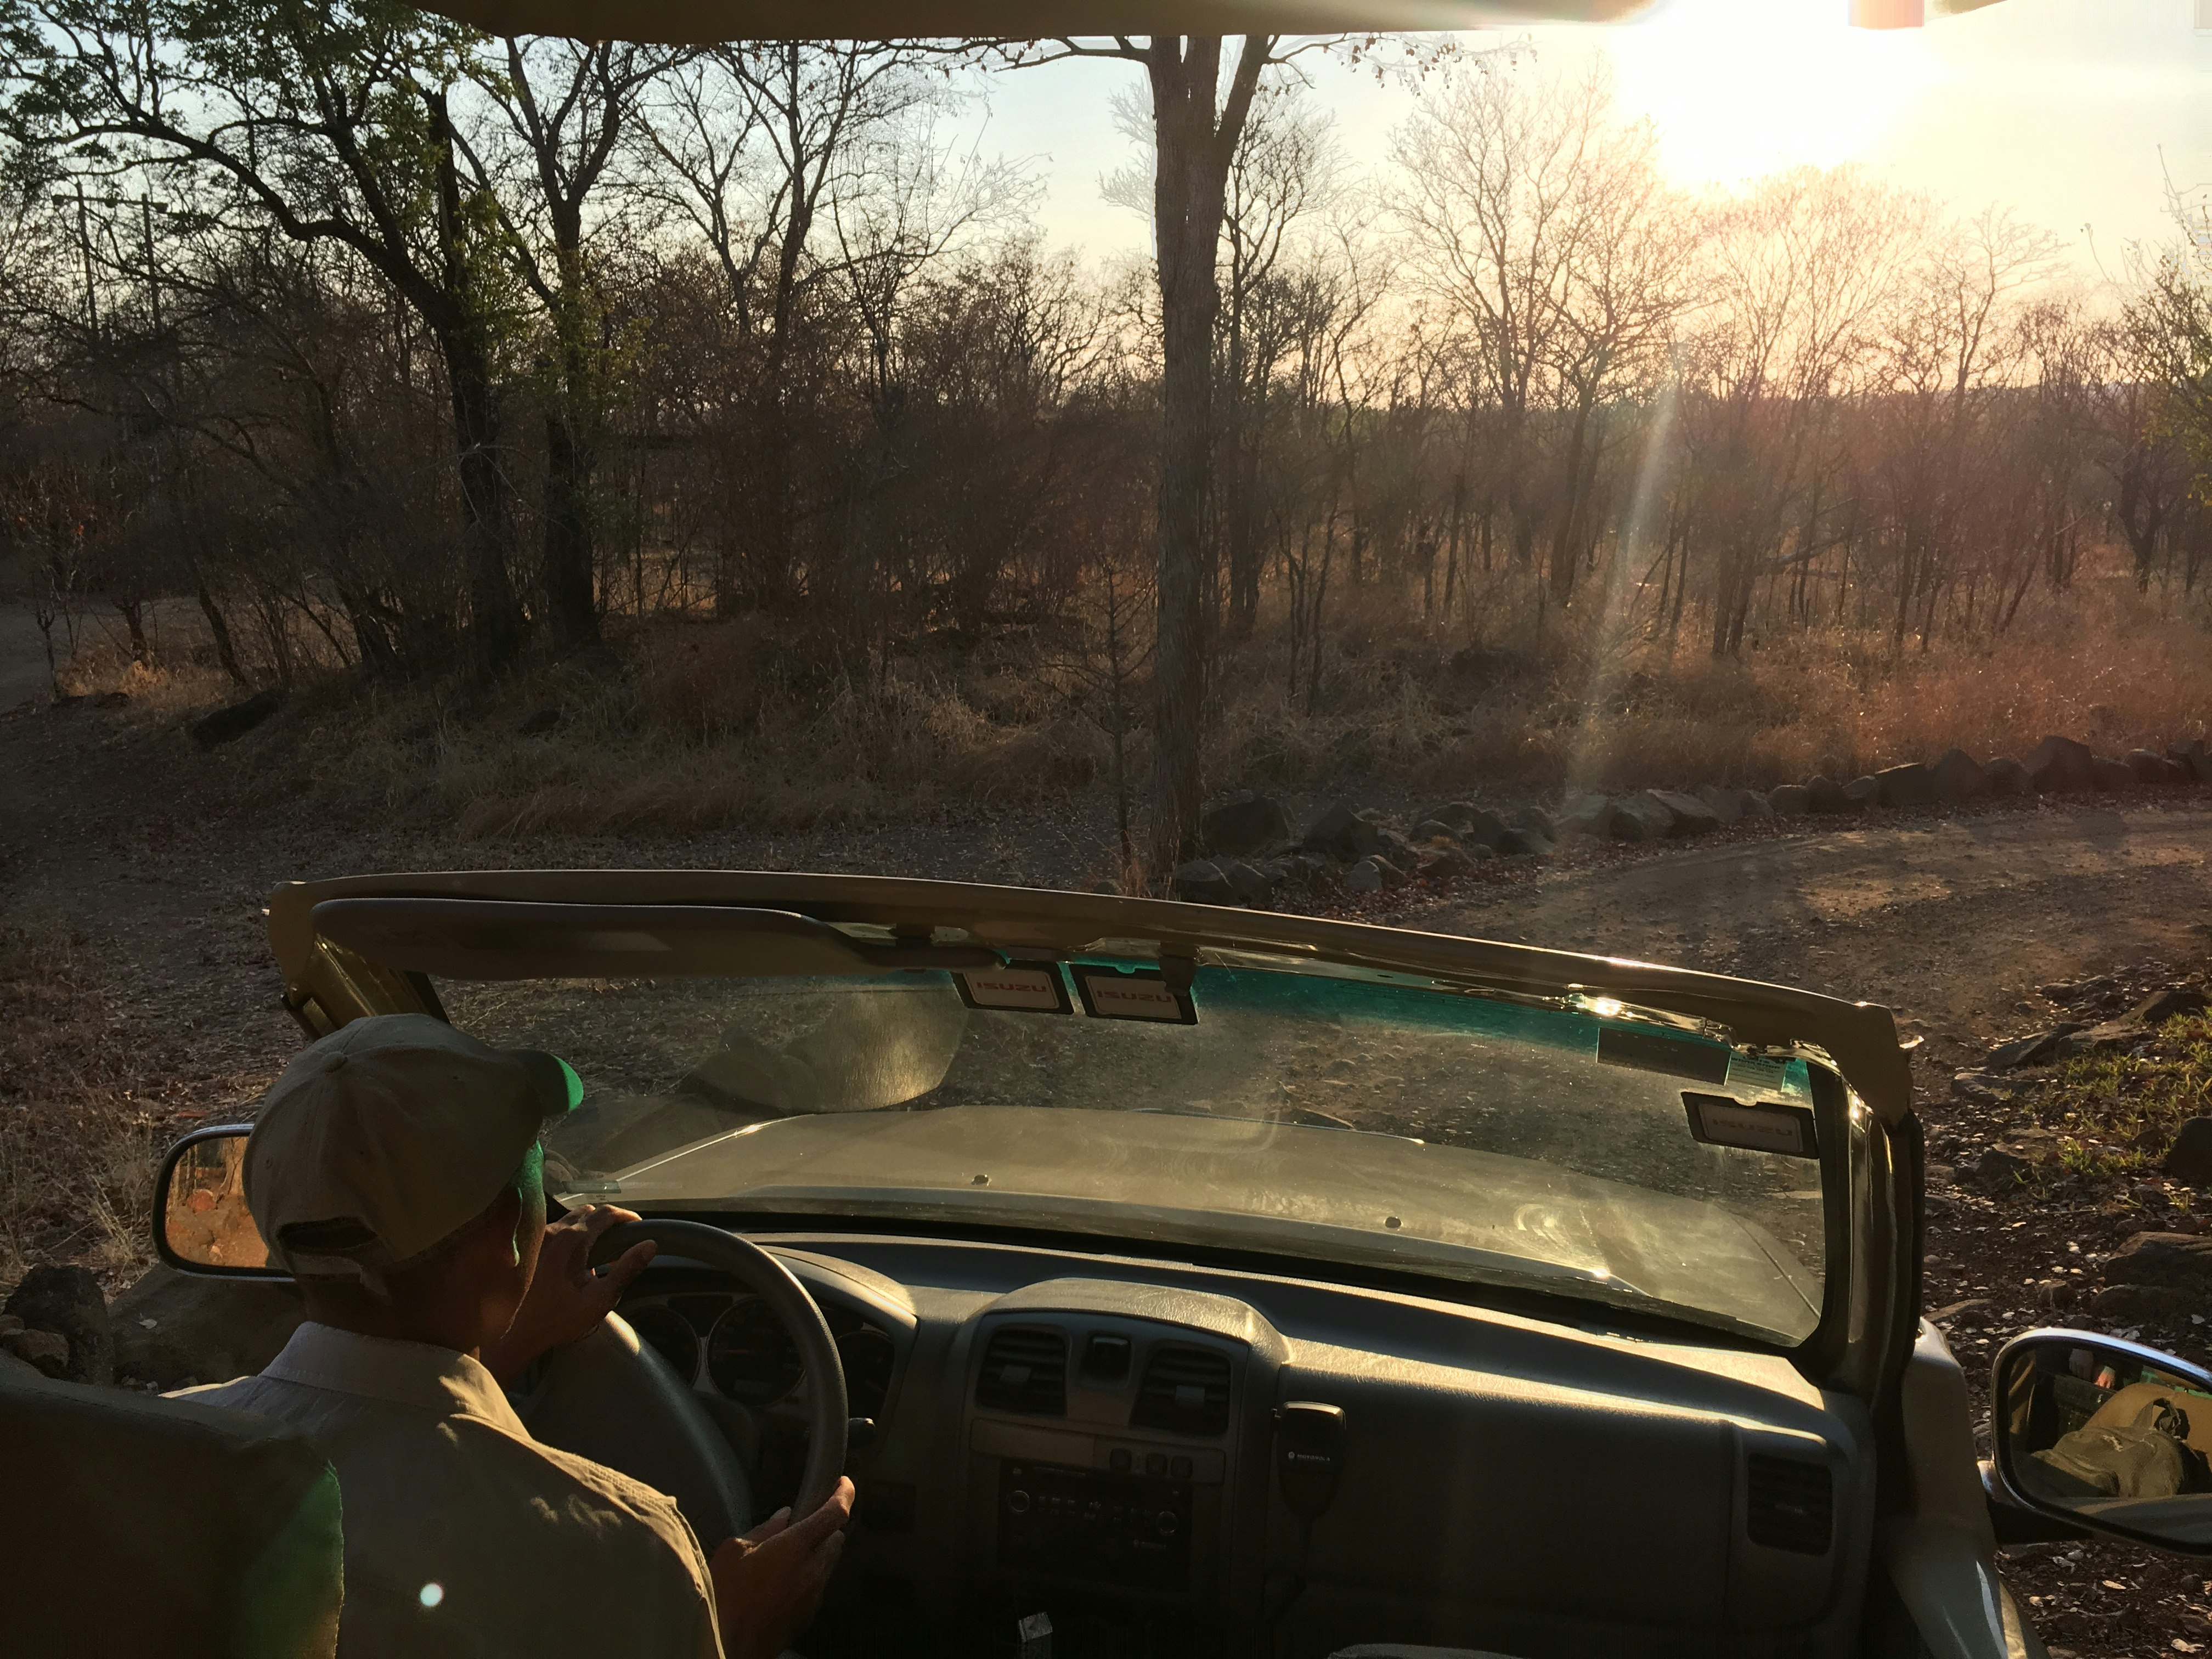 A view from the back of an open-topped 4WD safari vehicle; it looks down over the driver and hood of the truck to the dirt road head, with the sun shining brightly on the horizon.